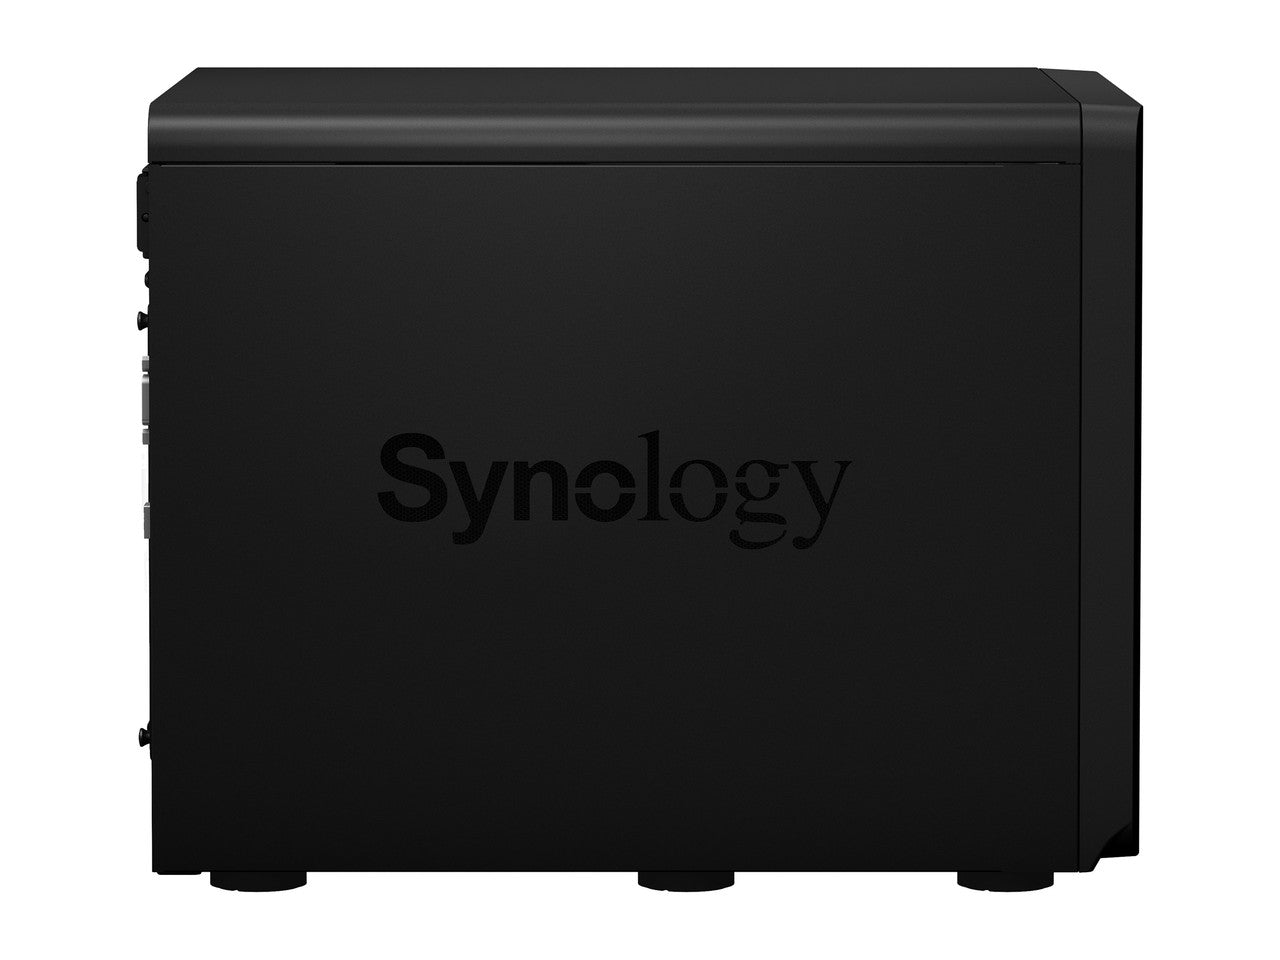 Synology DS2422+ Quad Core 2.2Ghz 12-Bay NAS with E10M20 10GbE Port and 1.6TB (2x800GB) CACHE, 4GB RAM and 96TB (12 x 8TB) of Synology Enterprise Drives